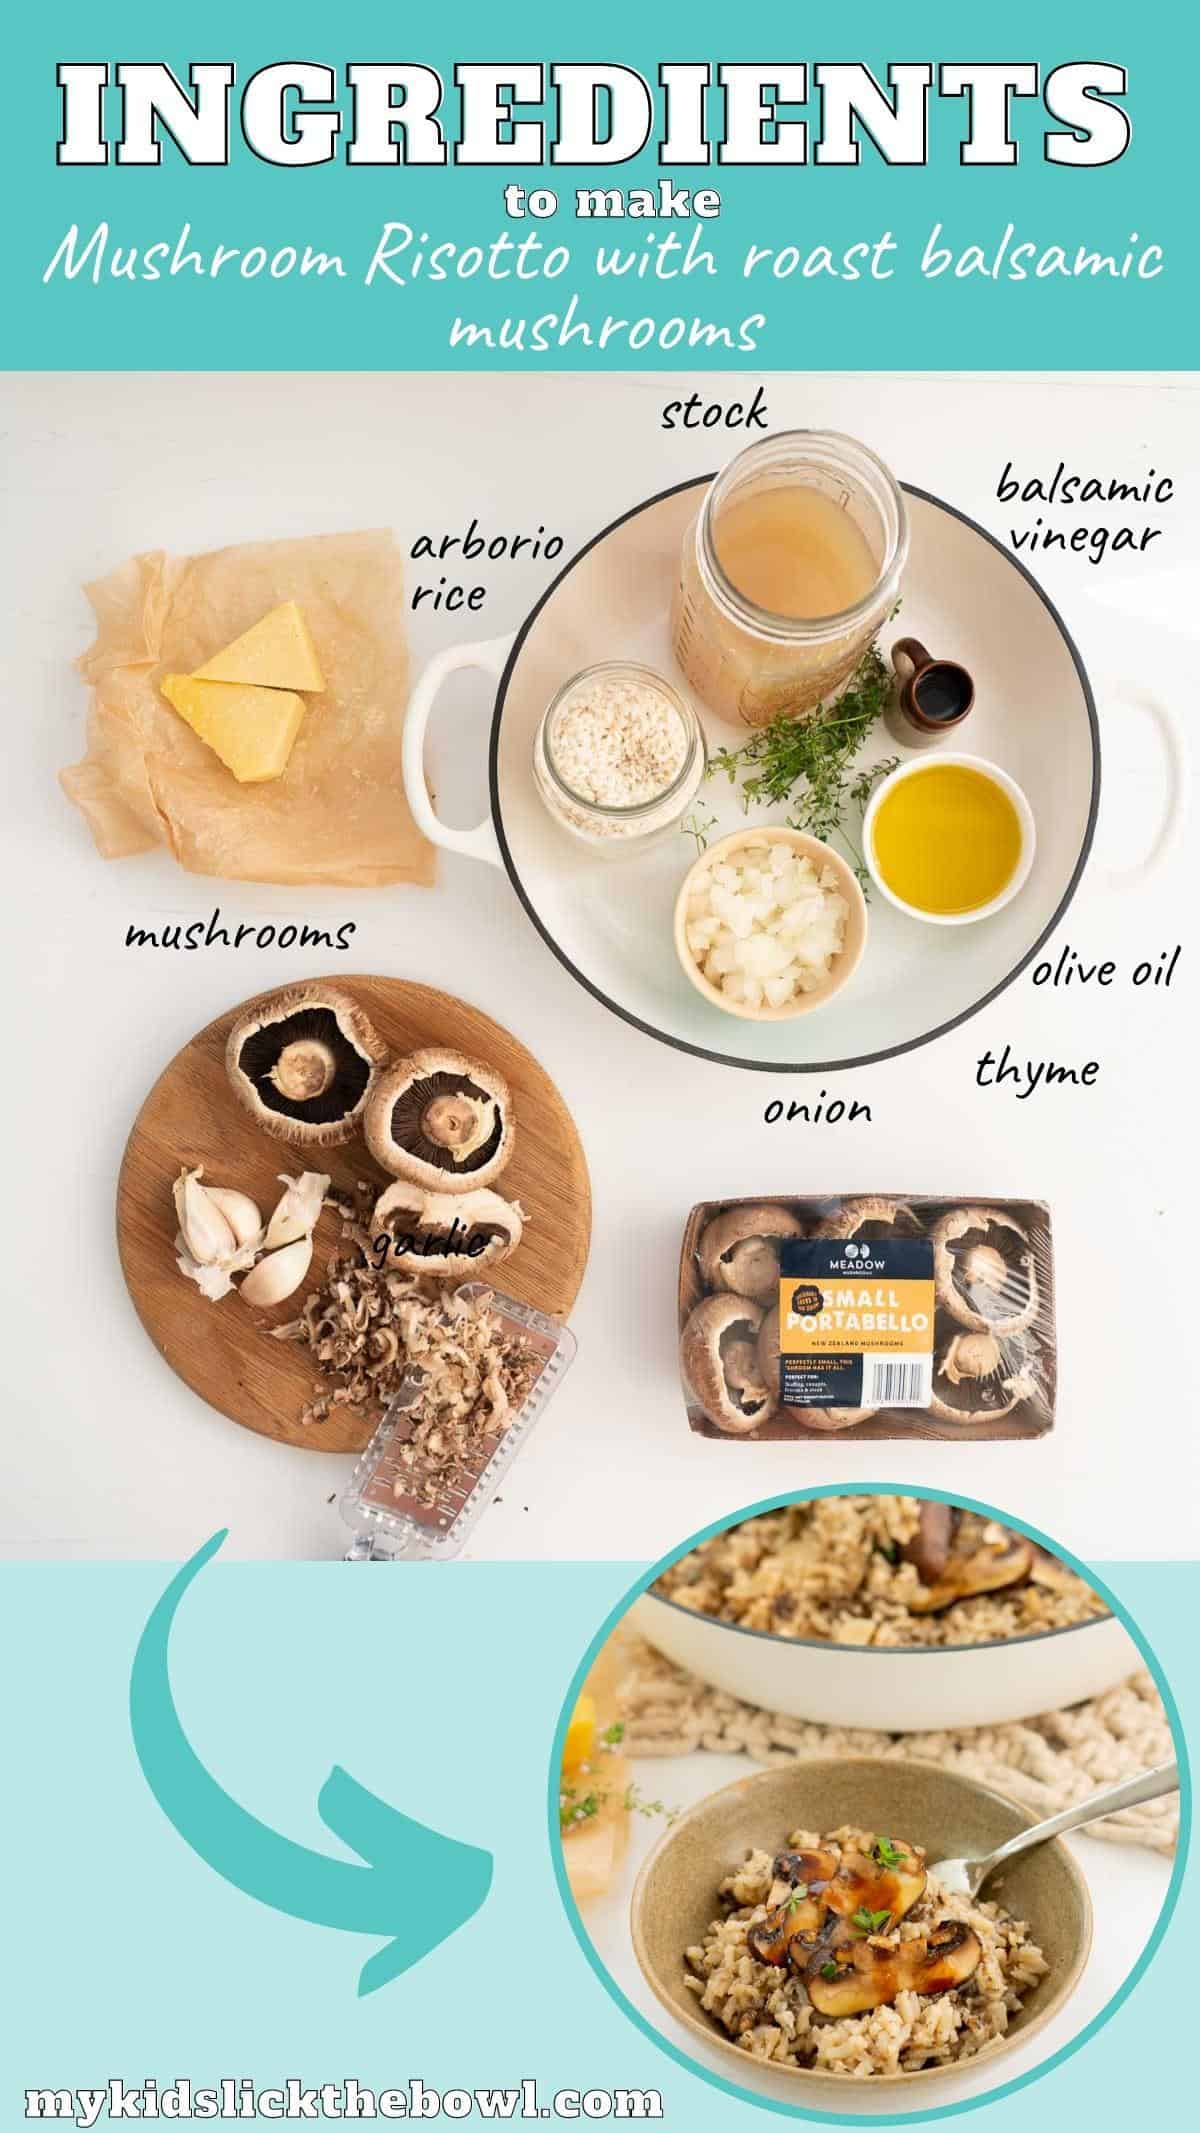 The ingredients to make baked mushroom risotto with balsamic roast mushrooms laid out on a bench top with text overlay.